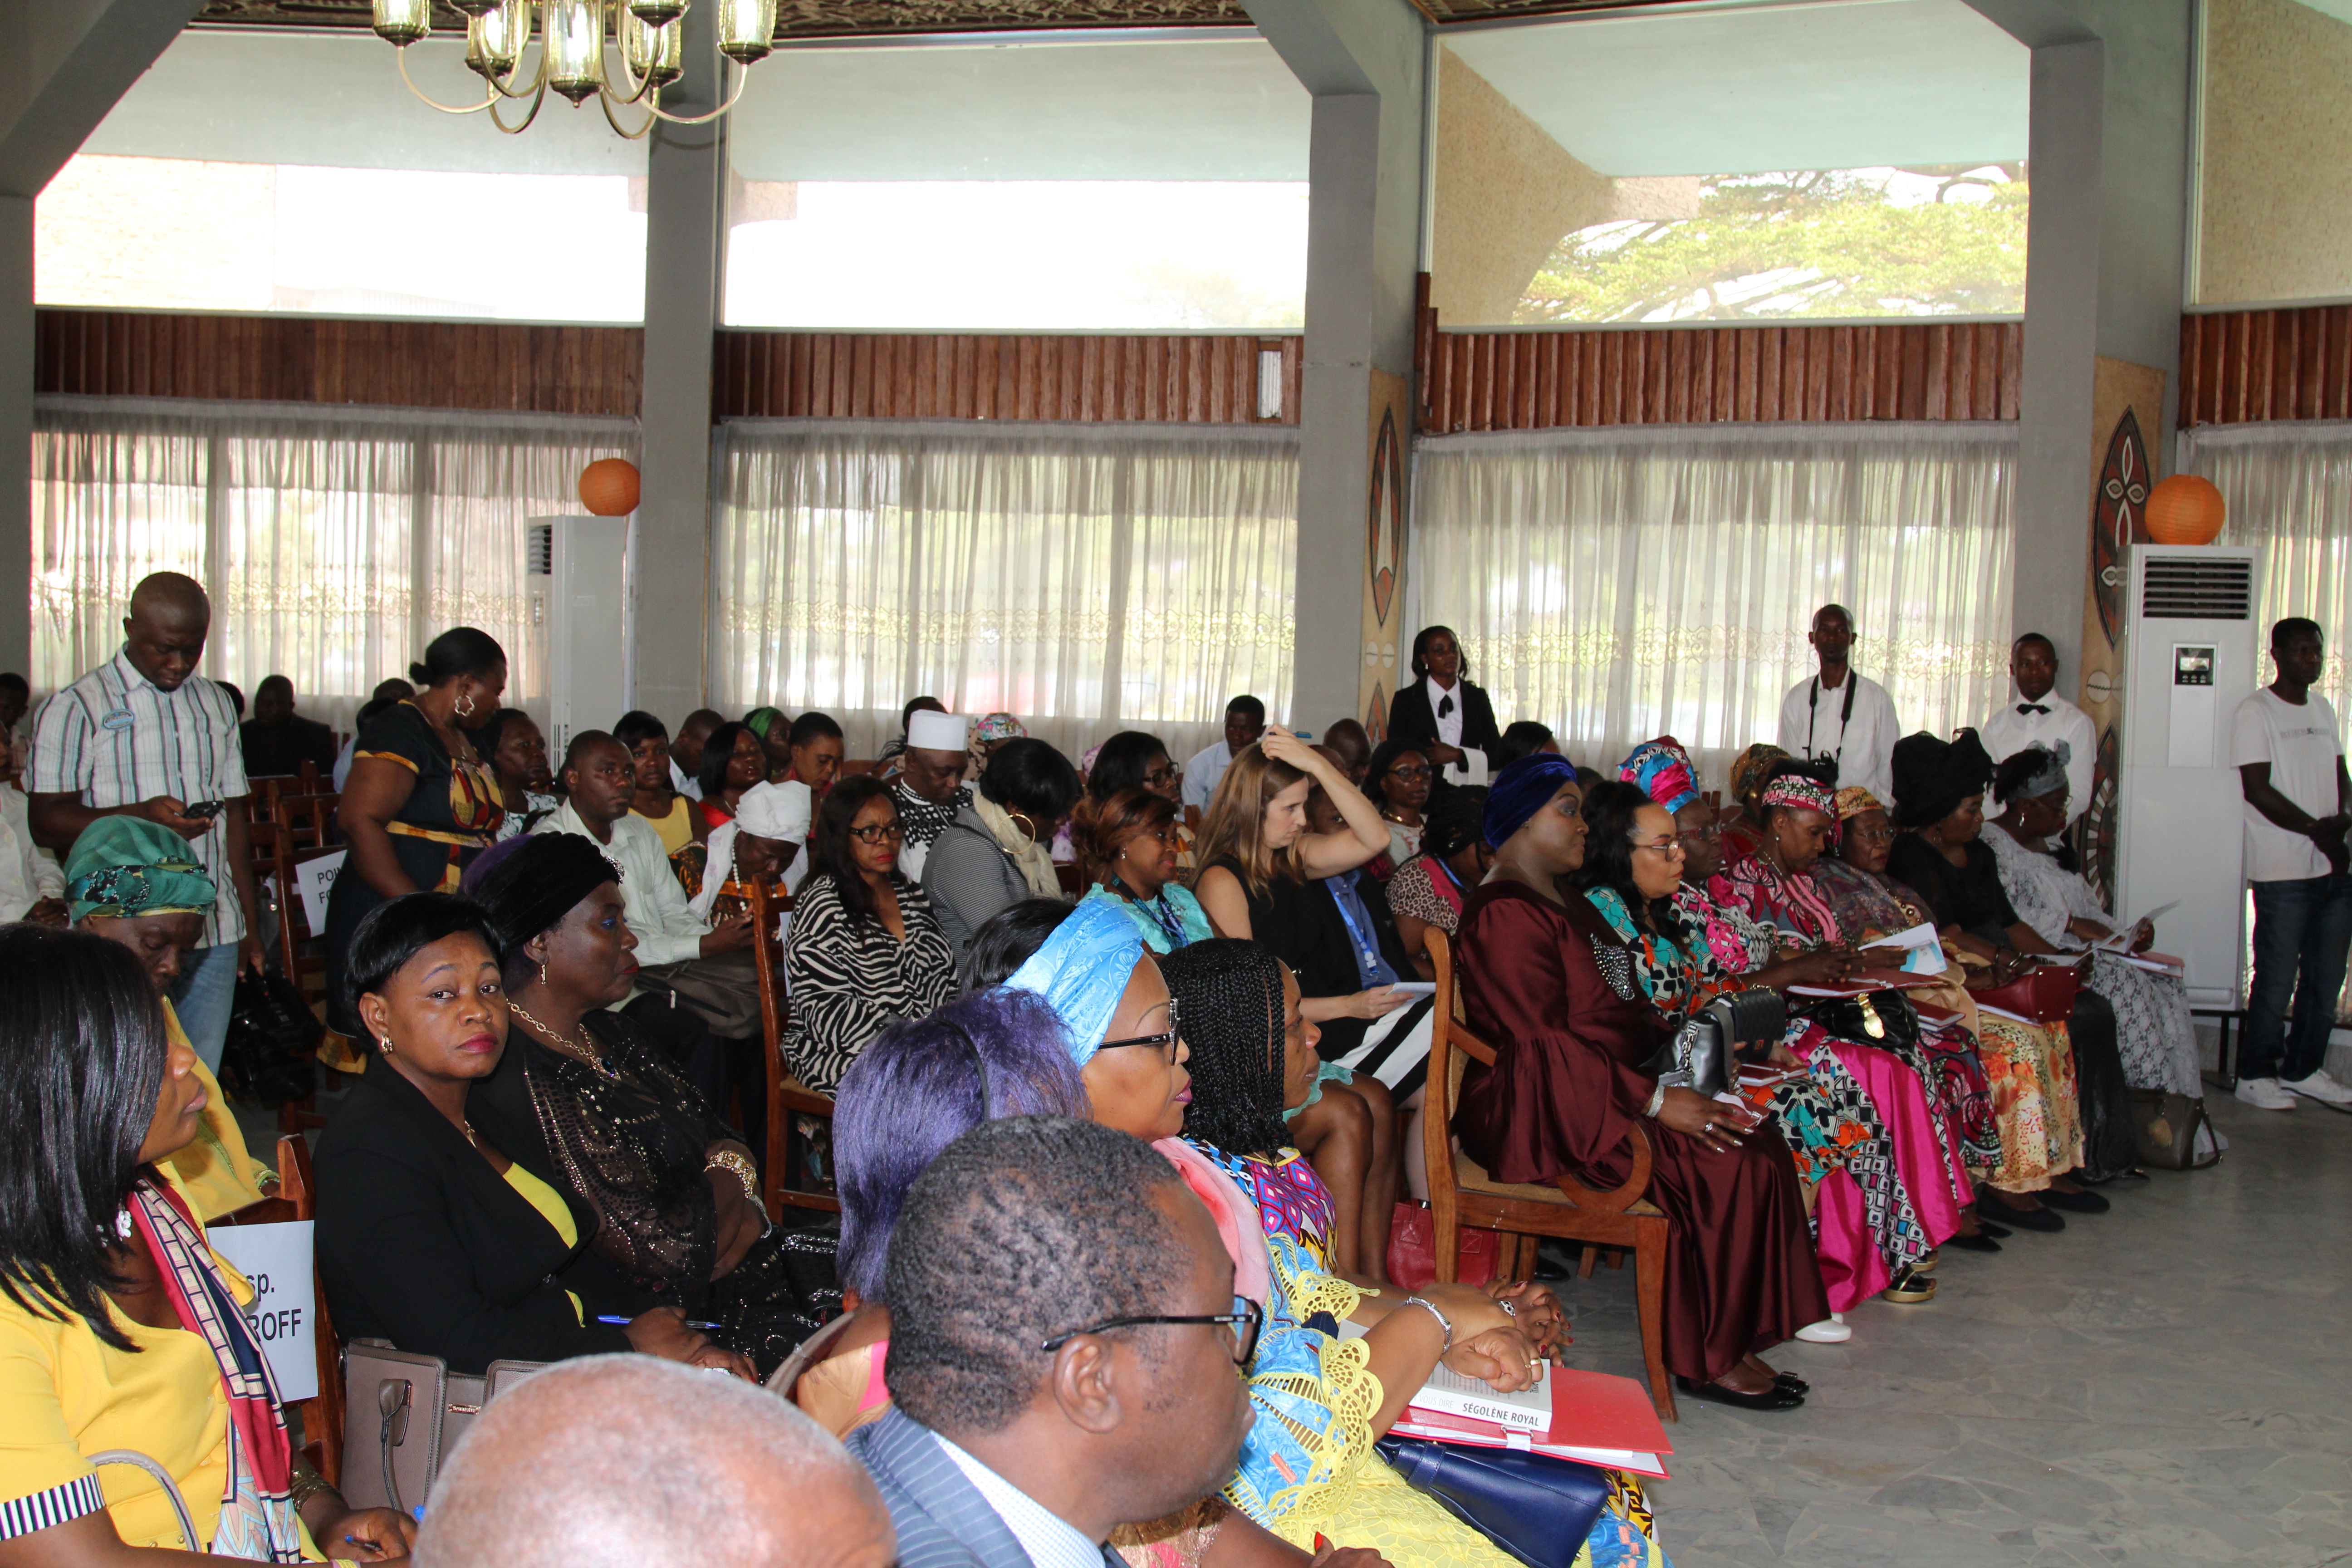 A cross section of stakeholders from government, elected positions, CSO’s and media present during the ceremony to officially present the tools to promote women’s political participation. Photo credit: Teclaire Same, UN Women. 